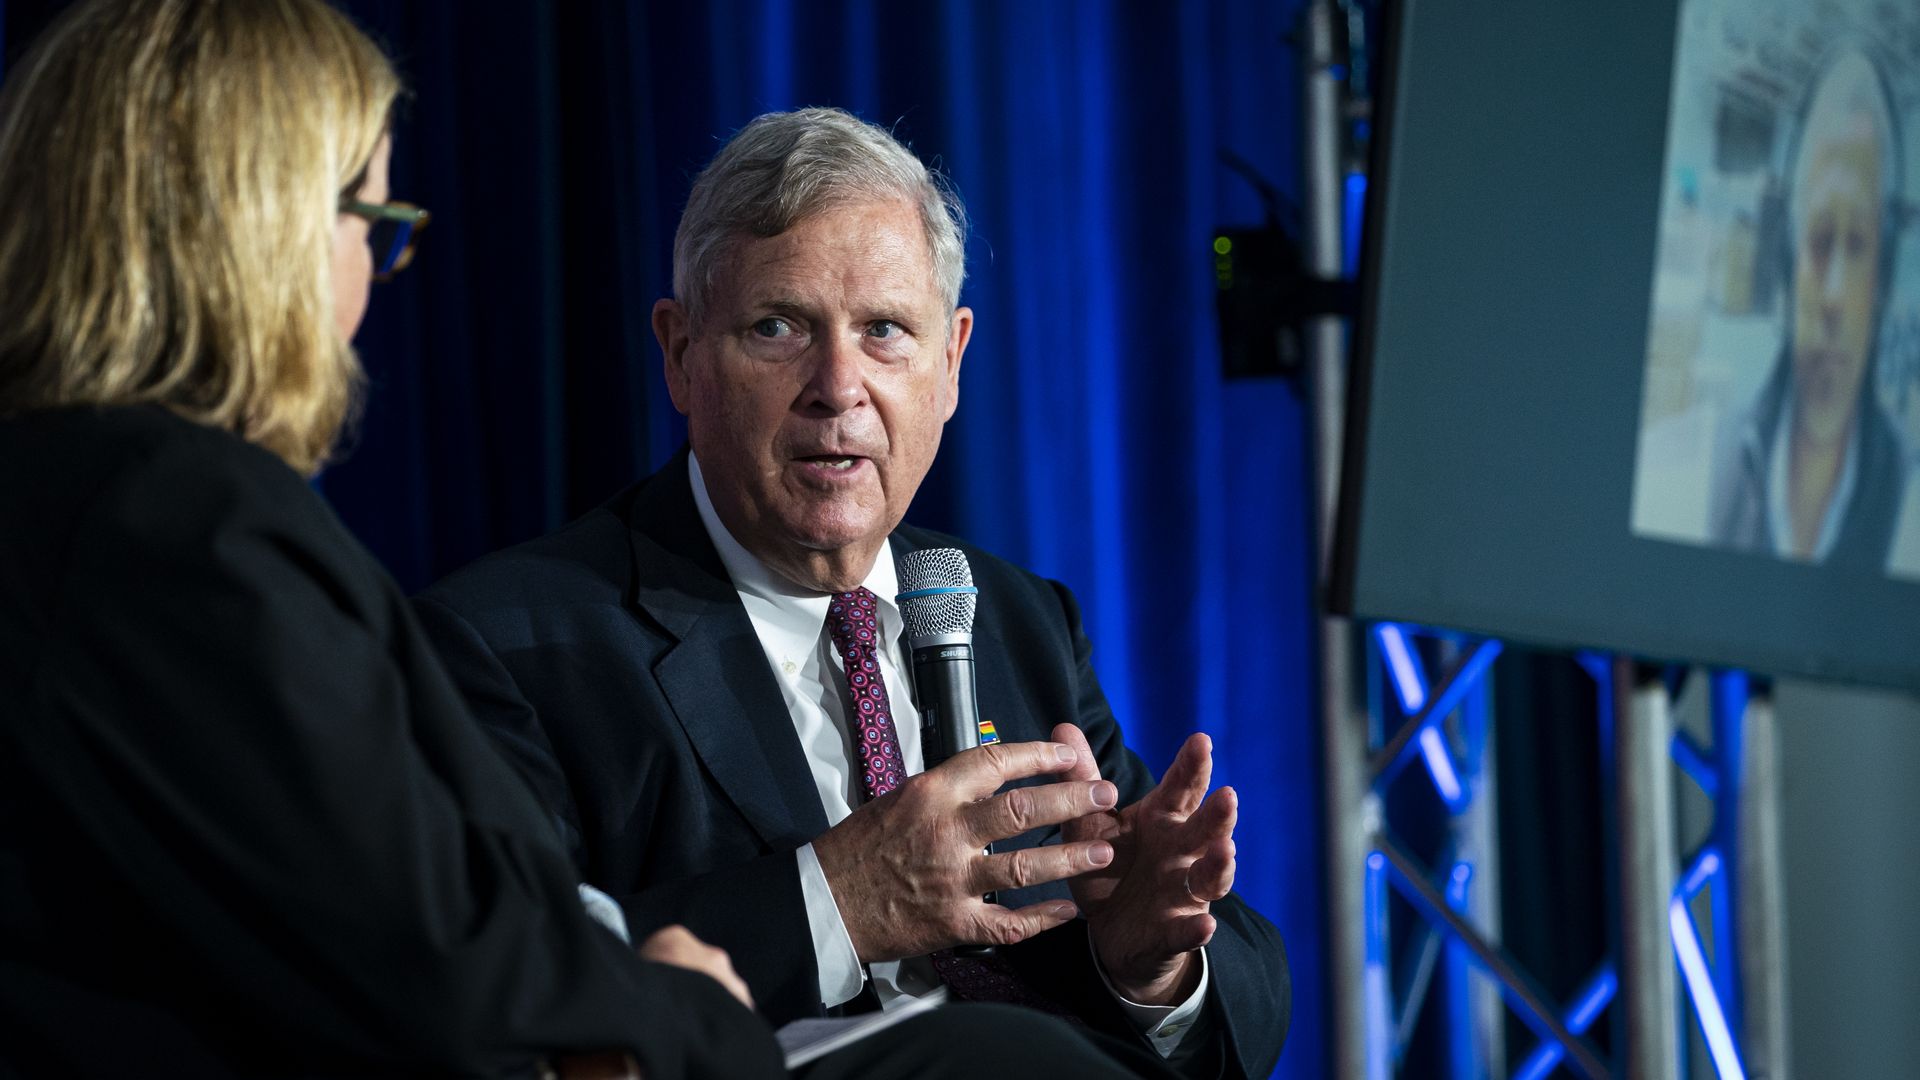 Agriculture Secretary Tom Vilsack, wearing a dark gray suit, white shirt and red tie, holds a microphone and speaks at an event.